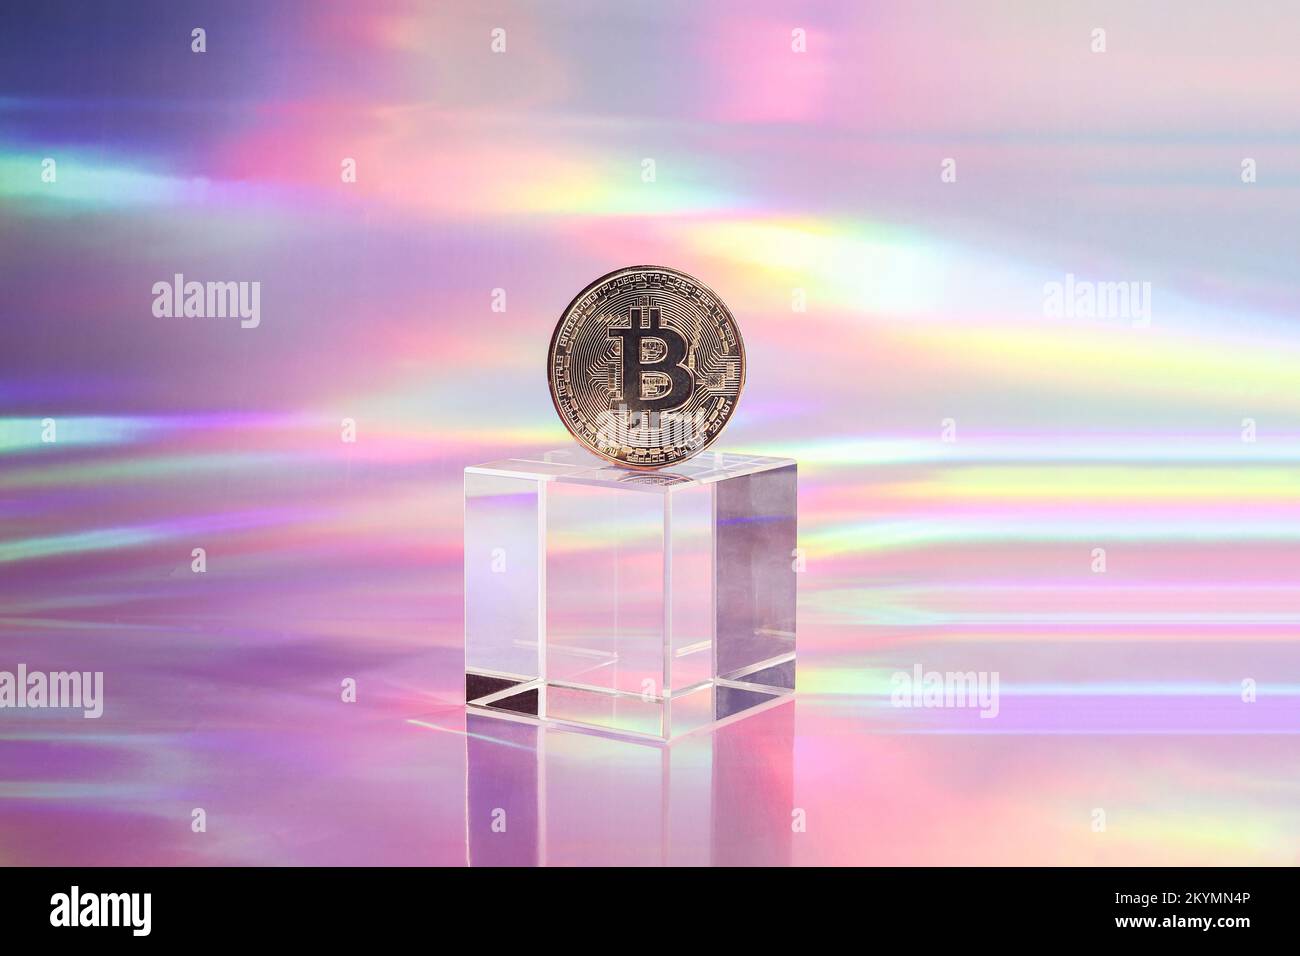 Golden bitcoin coin on podium on holographic, abstract, neon background. digital currency, business style. Mining and trade bitcoin concept. Stock Photo